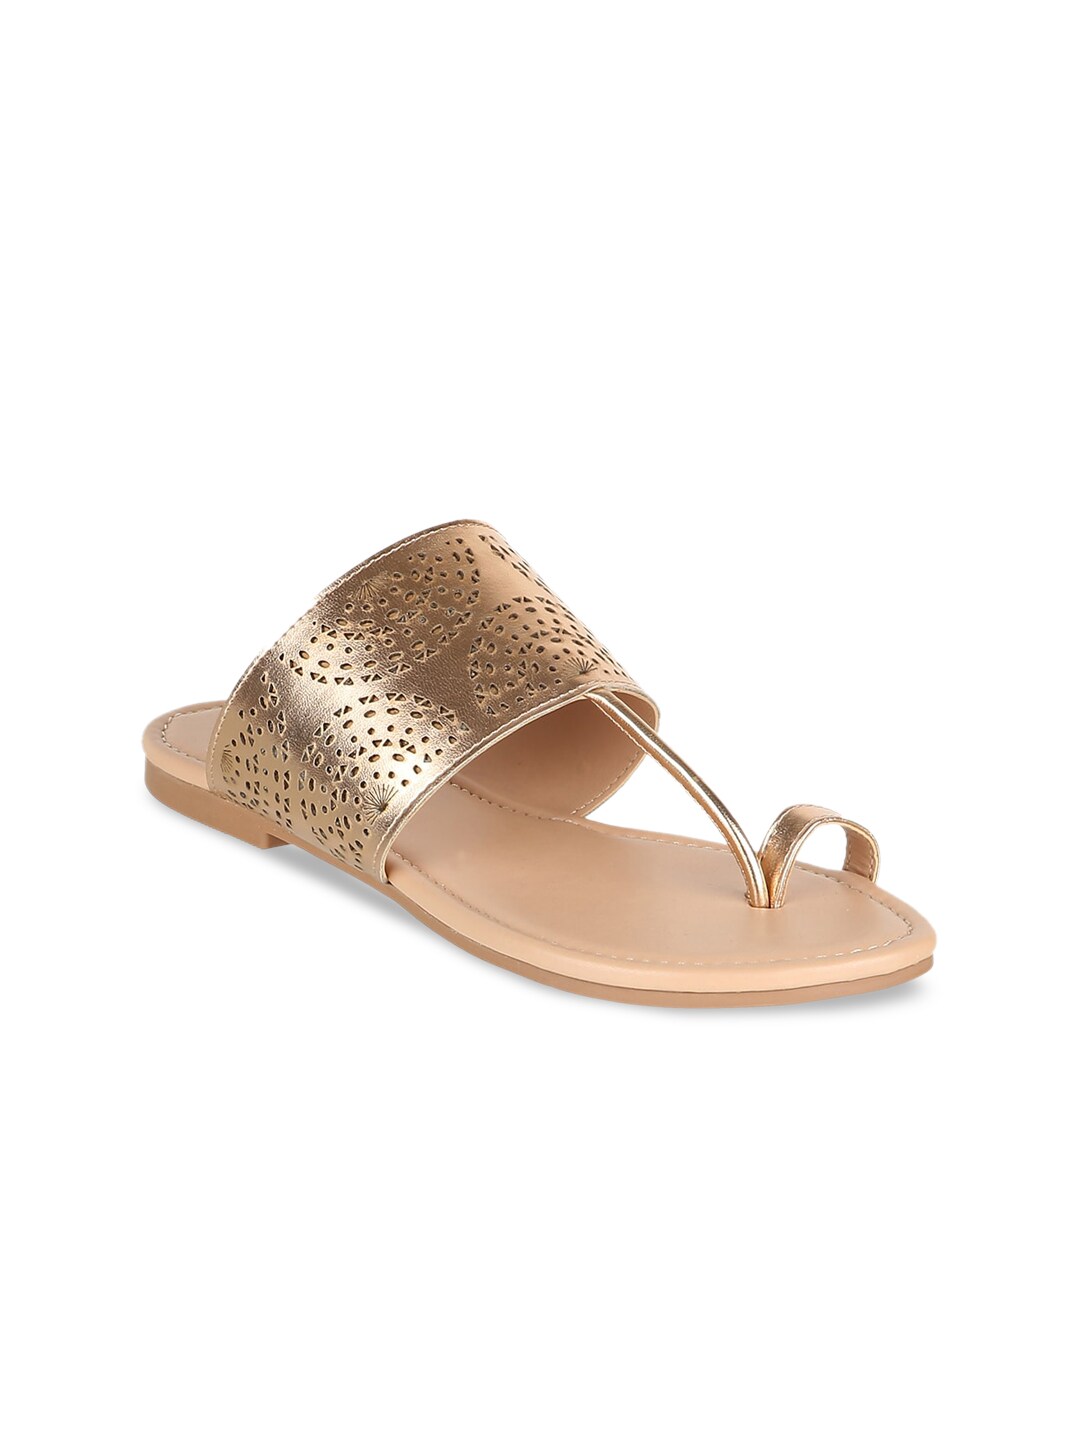 ELLE Women Gold-Toned Embellished One Toe Flats Price in India